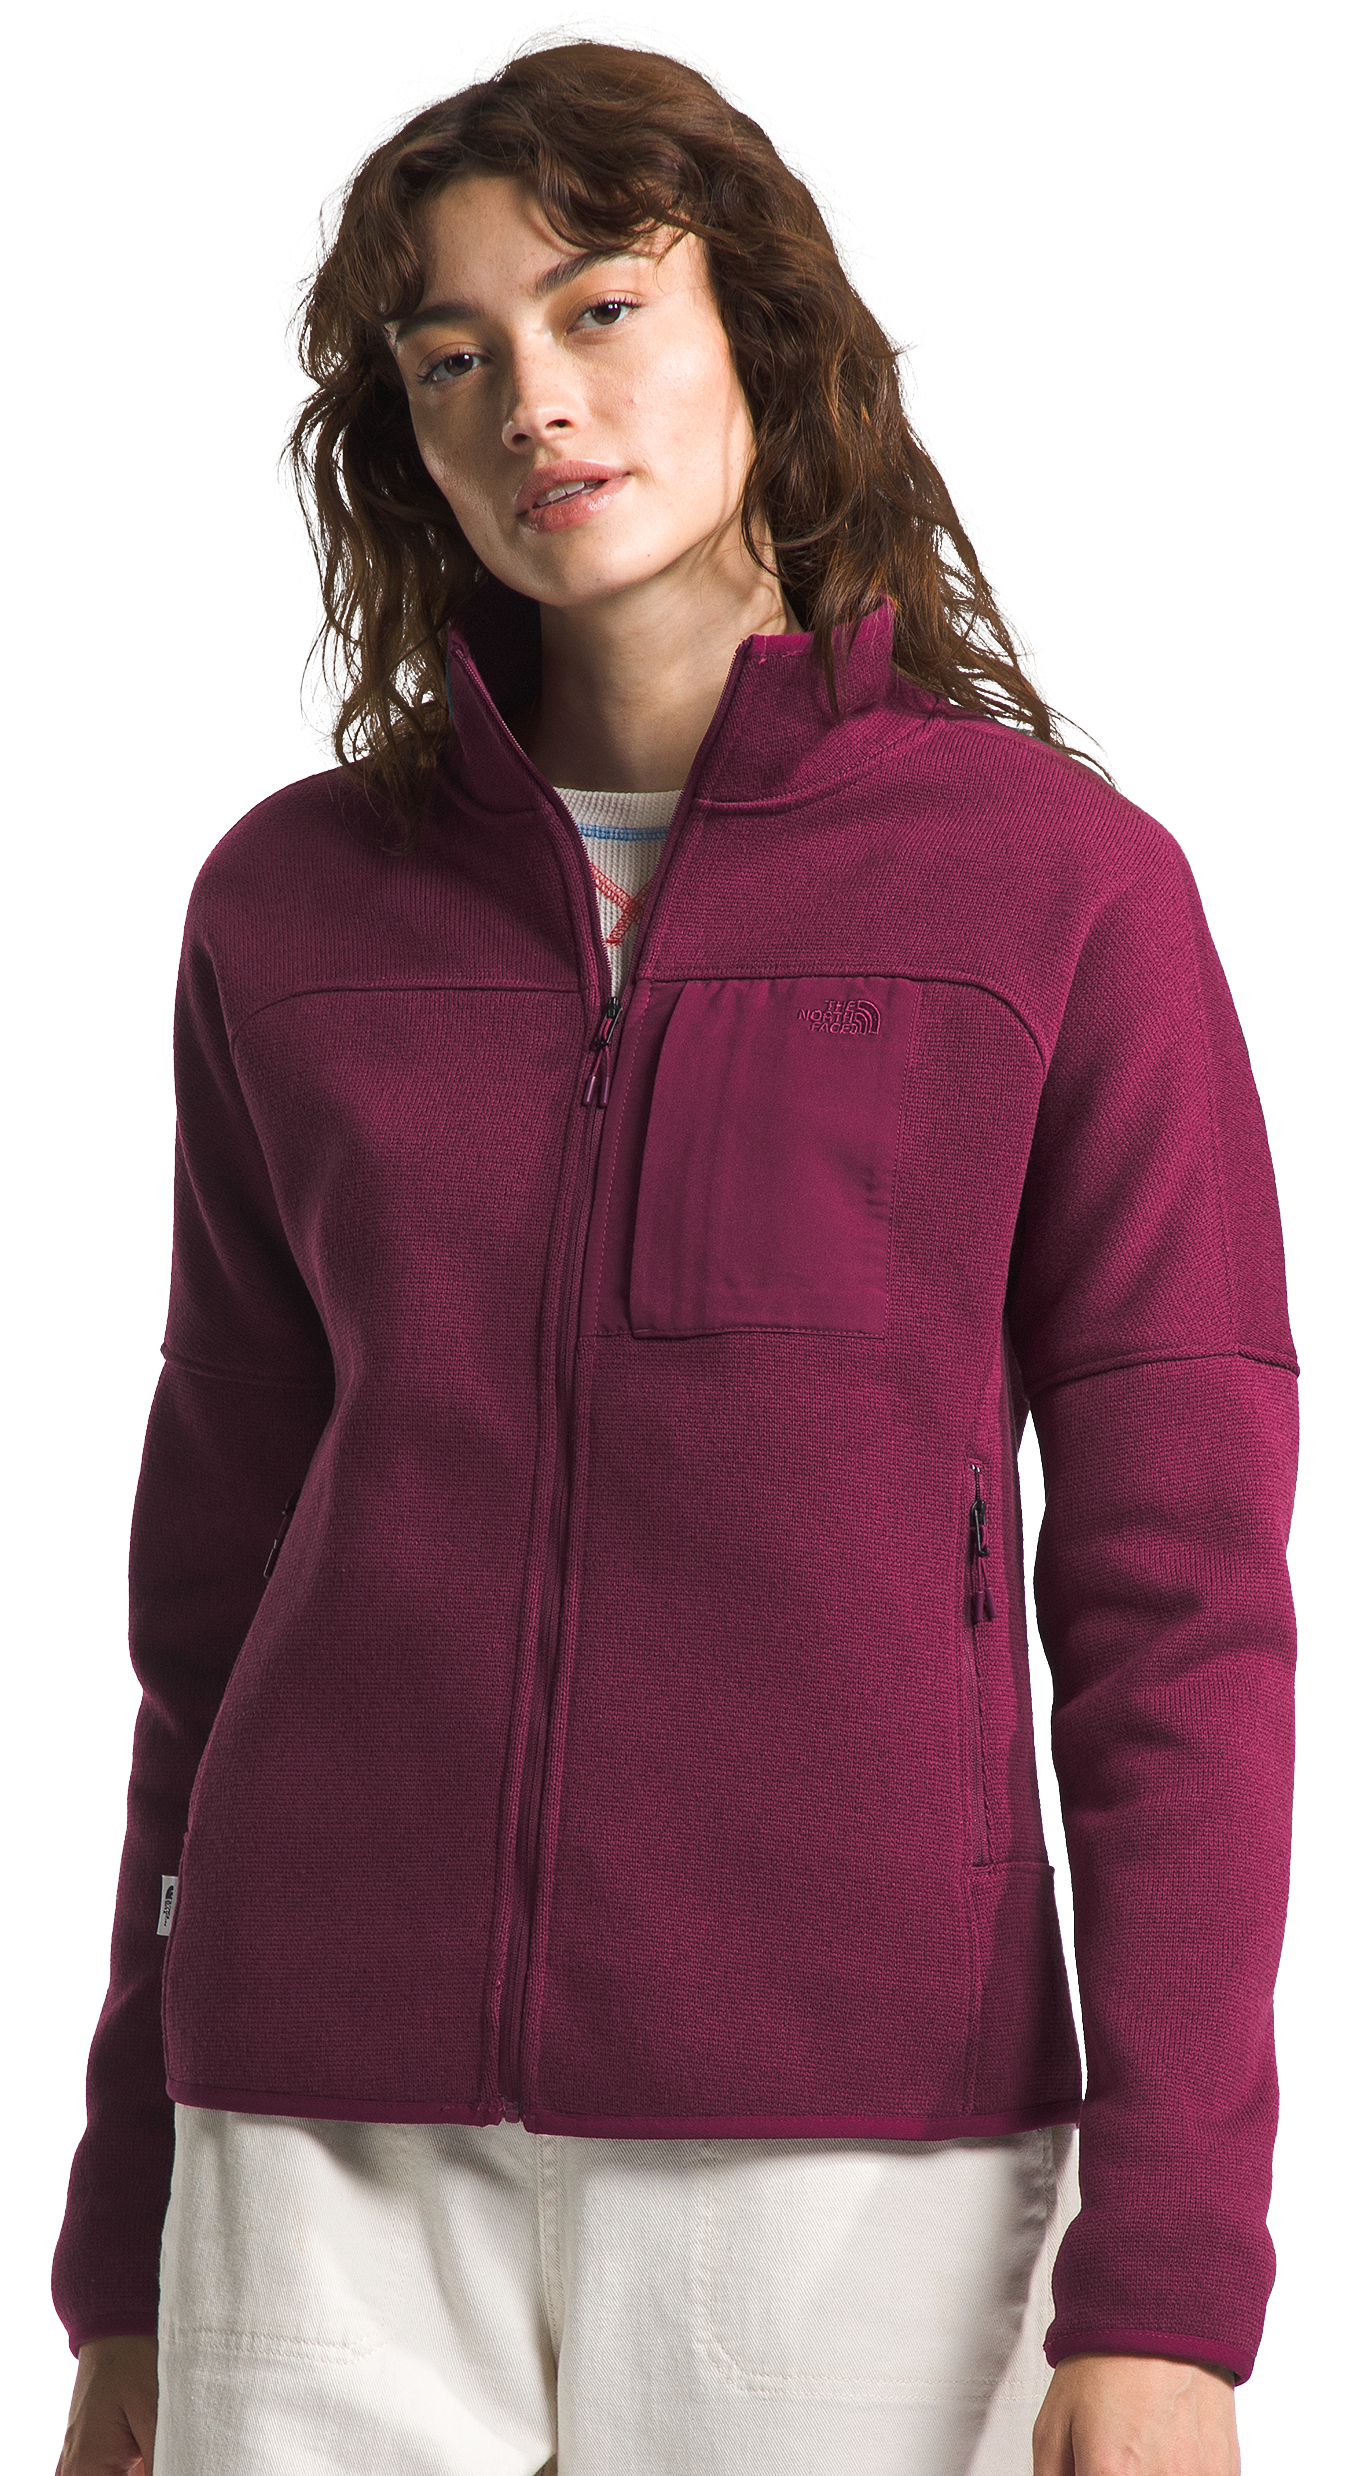 Ascend Outdoor Fitted Full Zip Women's Textured Fleece Jacket Pockets Large